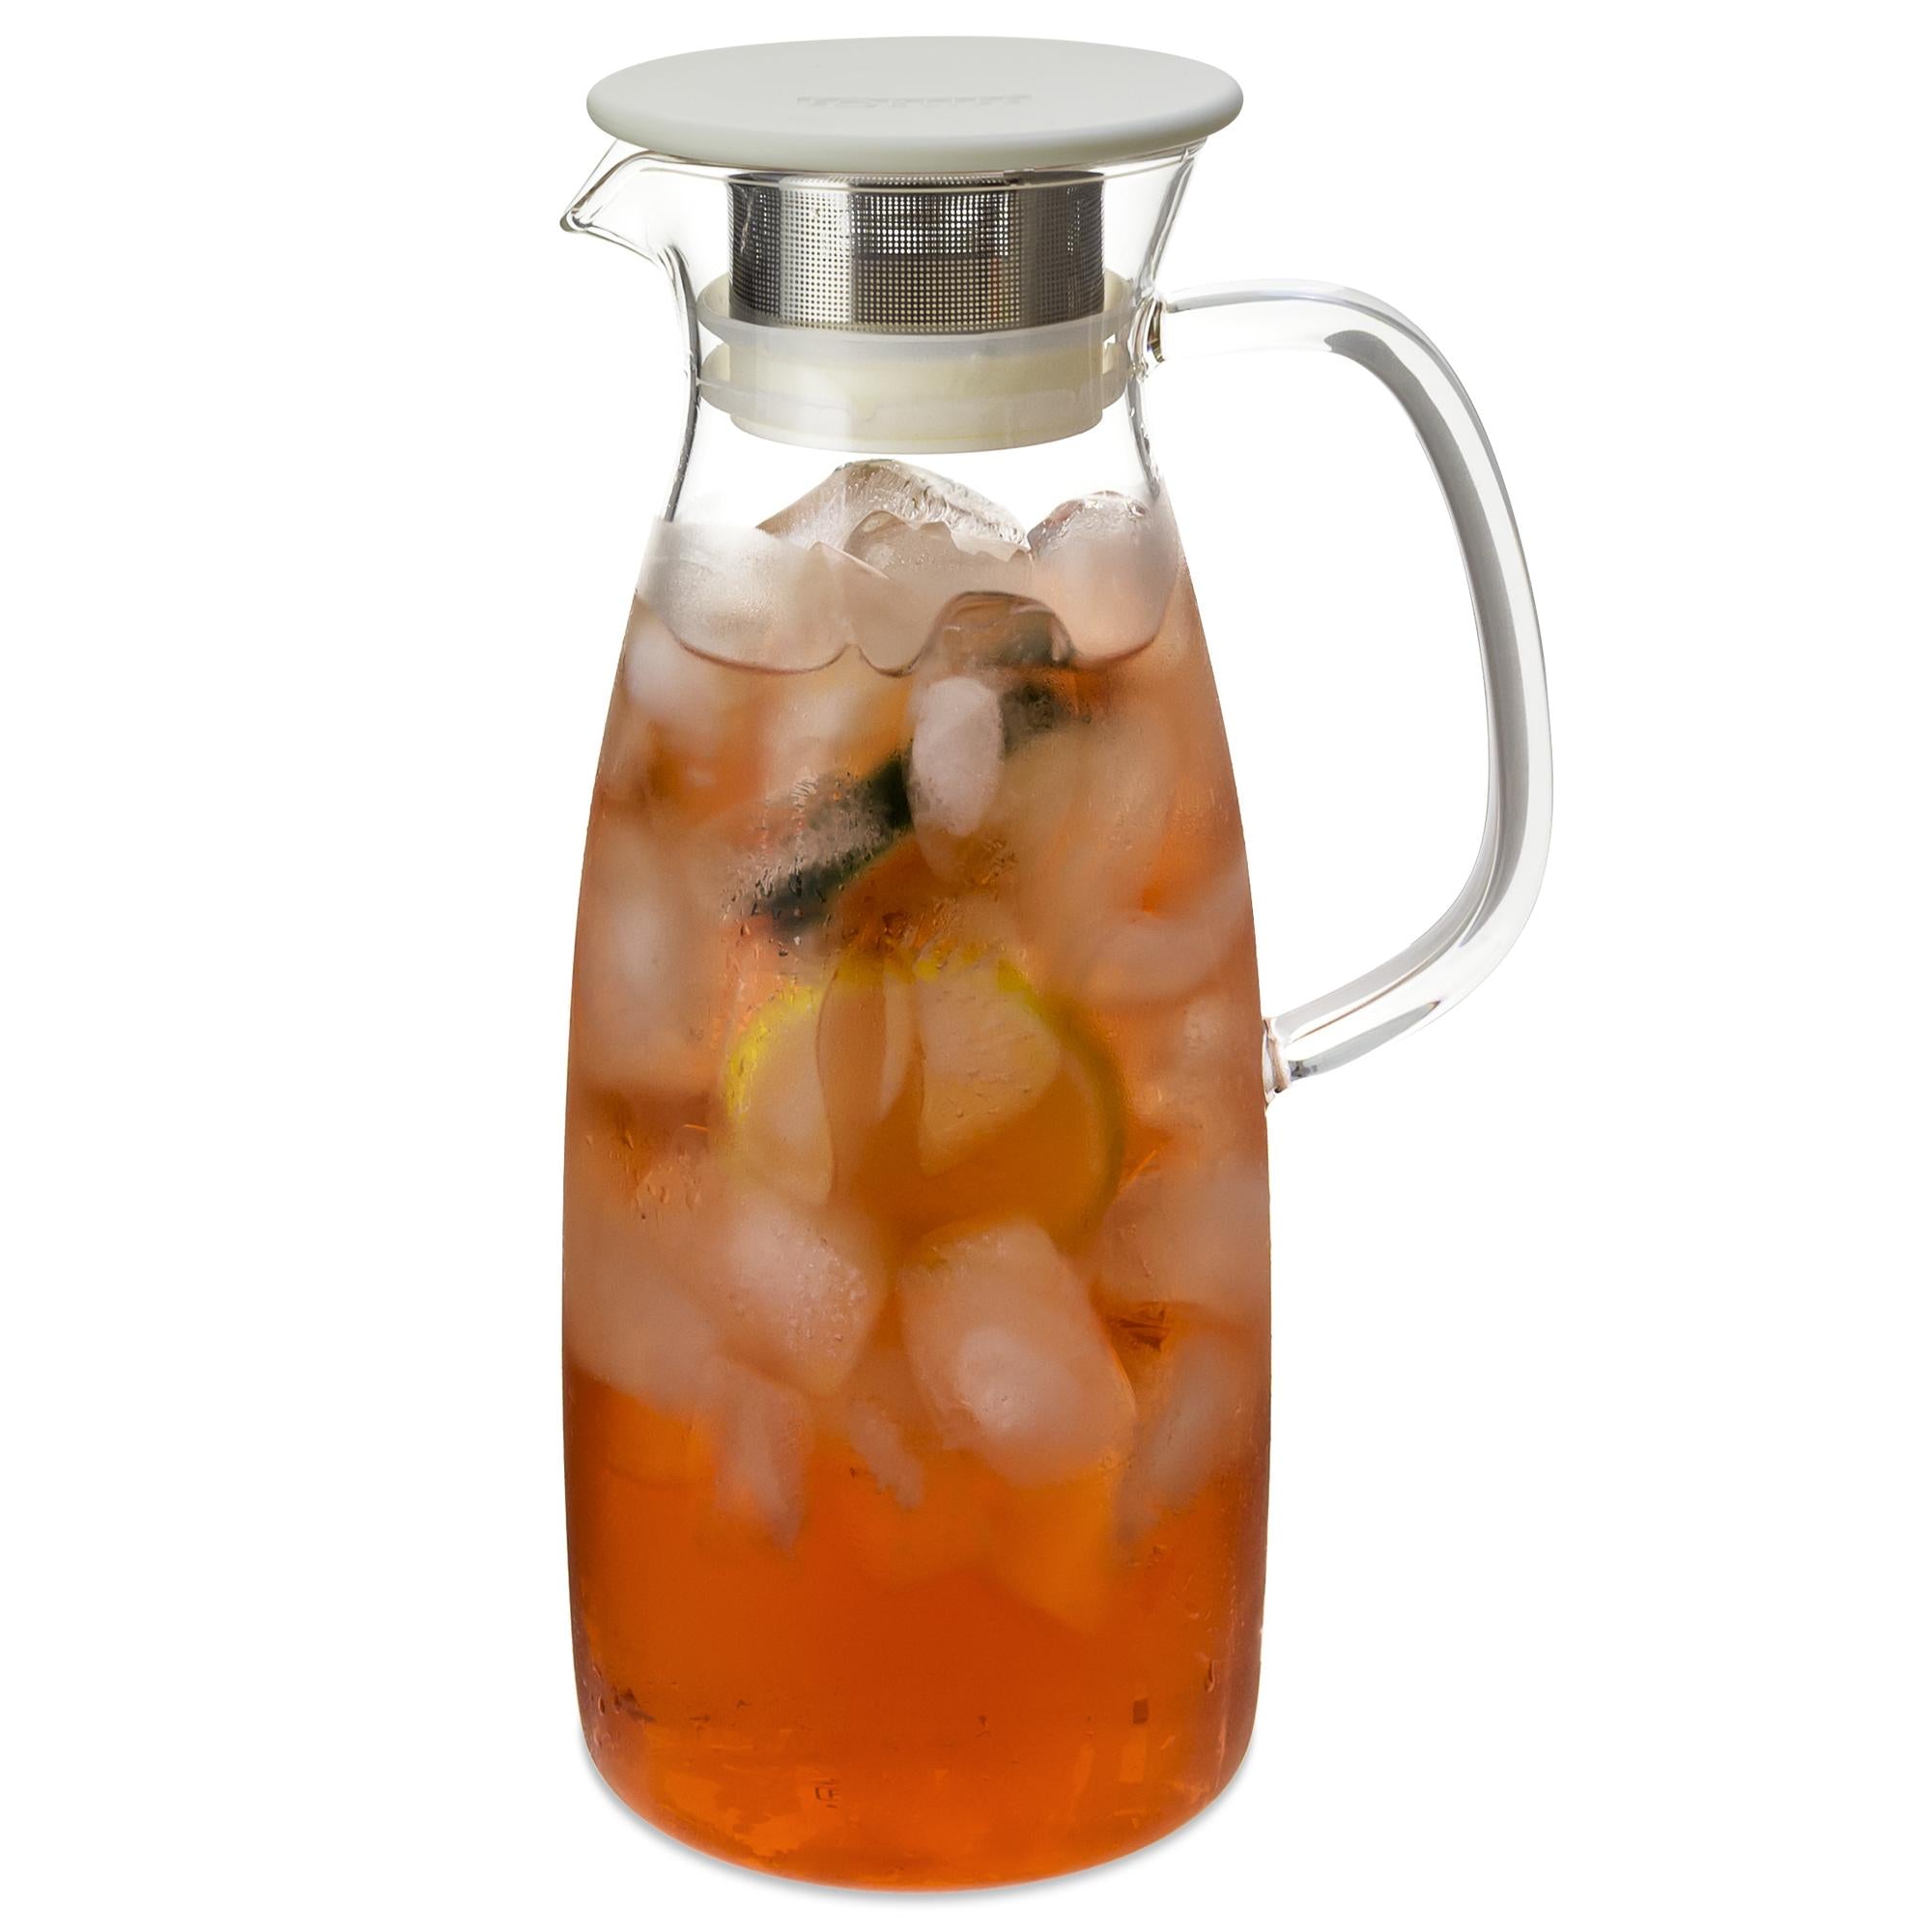 FORLIFE - Mist Iced Tea Jug for Cold Brewing - Great For Loose Leaf Iced Tea, and Fruit Infused Water - Heavenly Tea Leaves